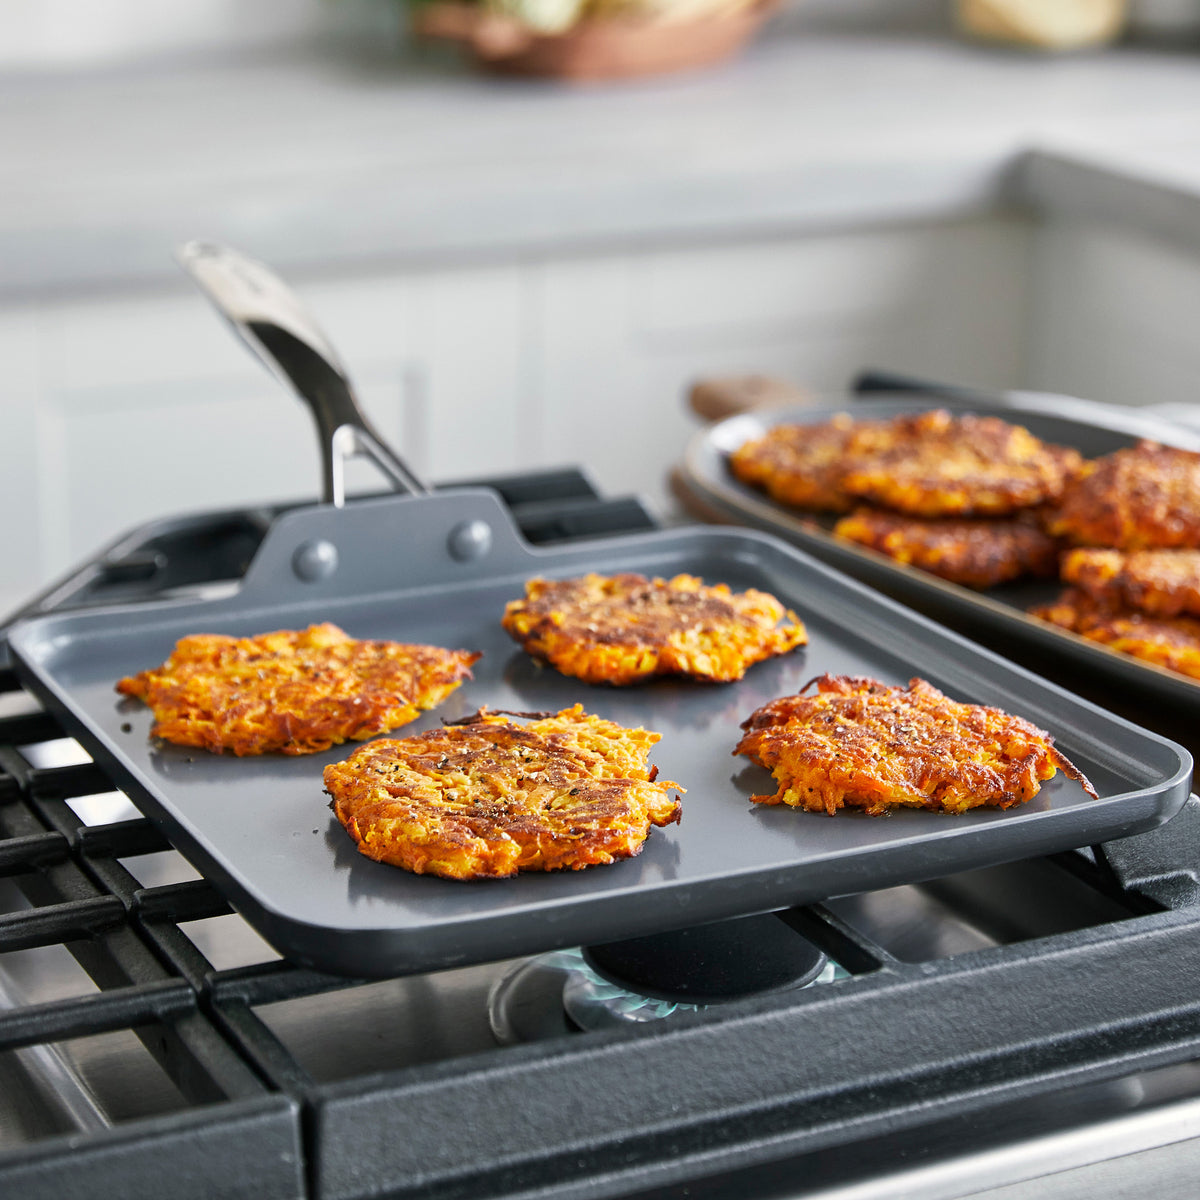 Nonstick Griddle & Grill Pans